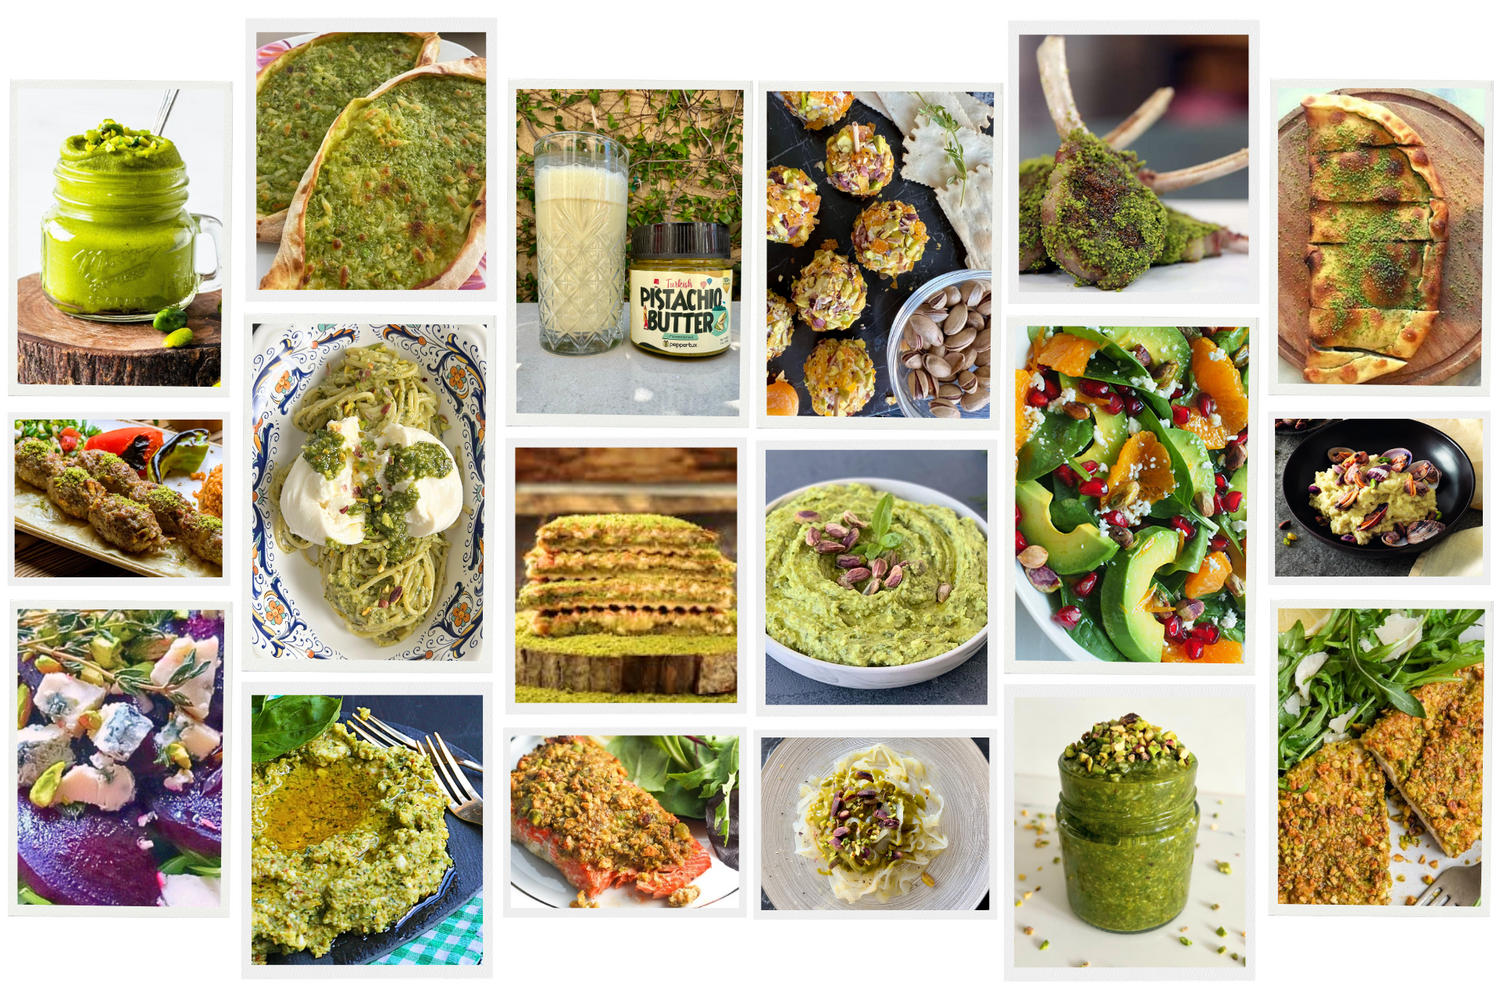 How to Use Pistachio Butter (Savory Edition - 25 Ways)